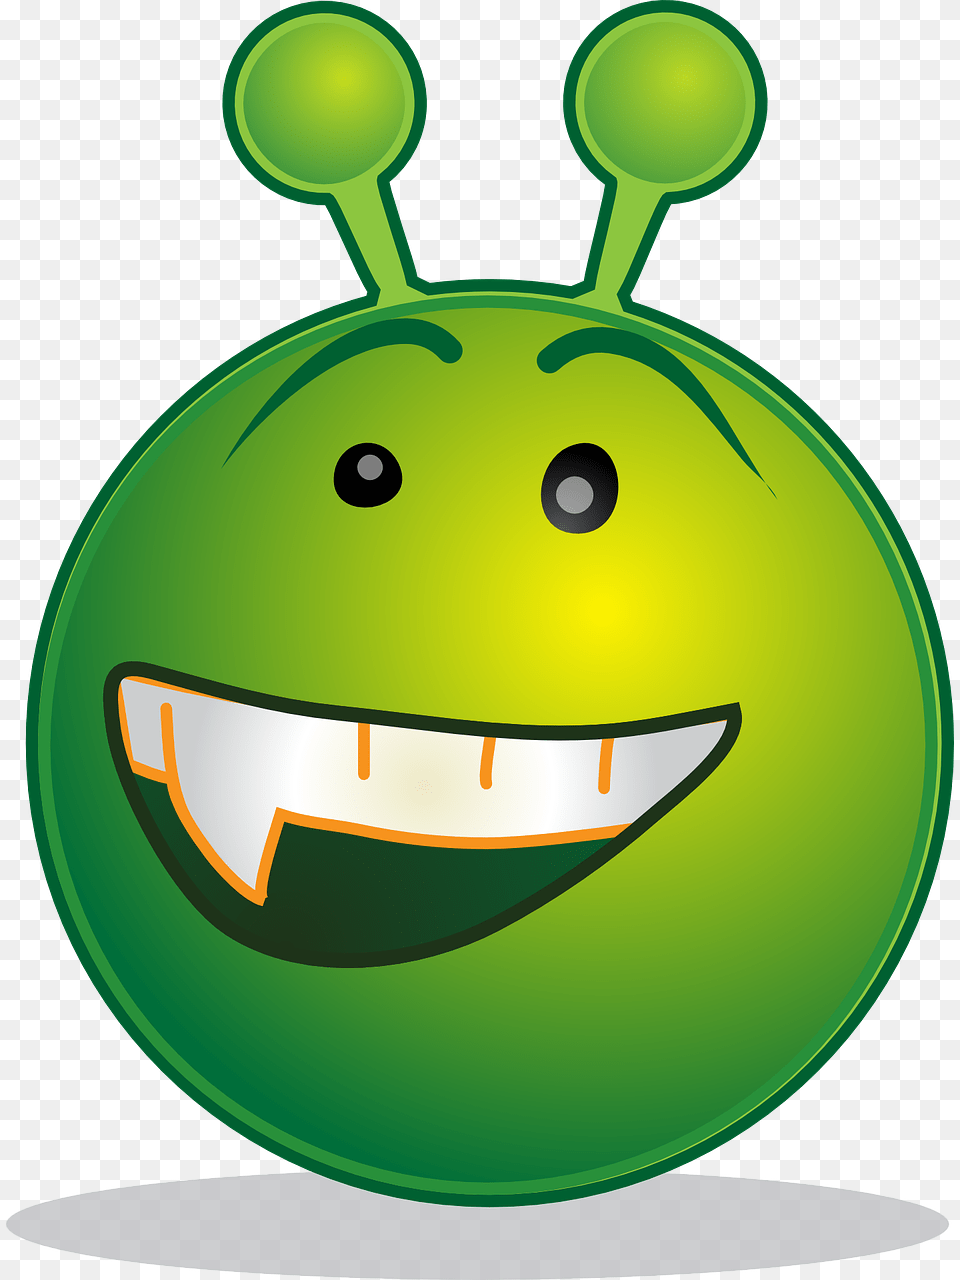 Alien Smiley Emoji Emotion Emoticon Computer Sorry For Time Waste, Green Free Png